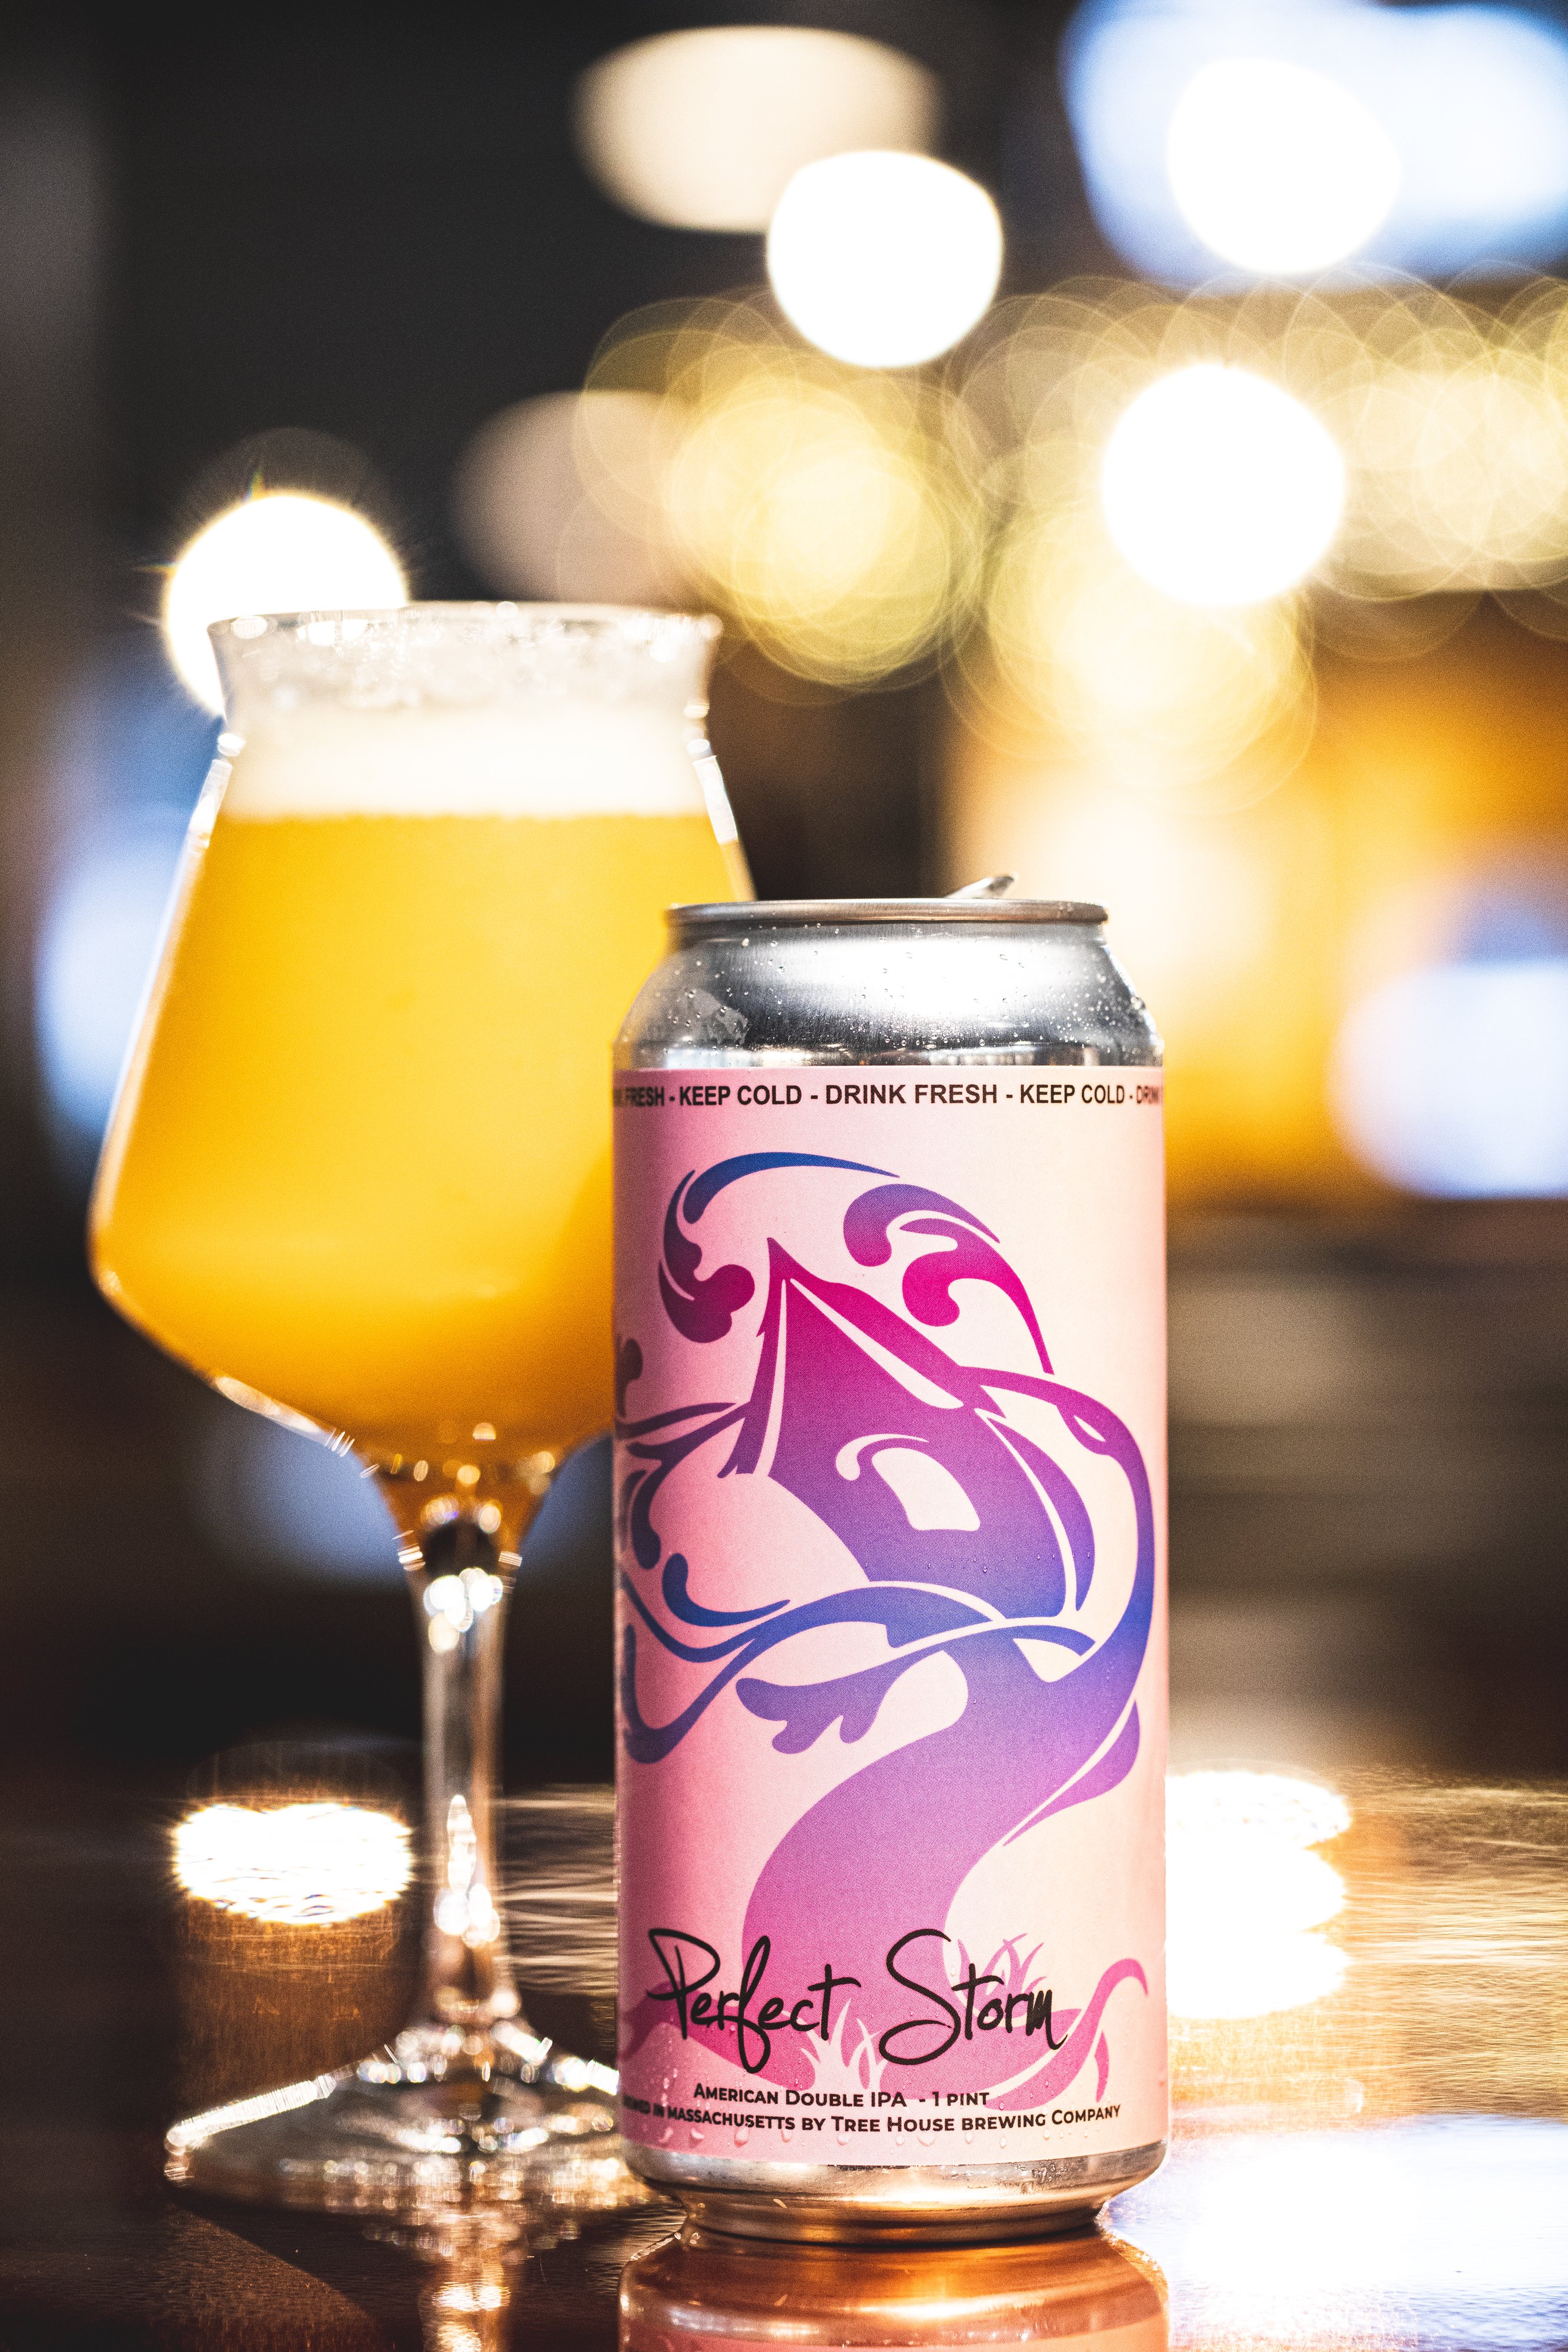 Read fair Frog Ο χρήστης Tree House Brewing Co.🍺 στο Twitter: "Perfect Storm. This tastes  just like heaven. Seriously, it's a banger. 🍊🥭🍑🍈🥭🍈🍊🍓🍍🍓🍊🍈🍑💫  https://t.co/aF5nbDL58i https://t.co/rqqaspkGeK" / Twitter